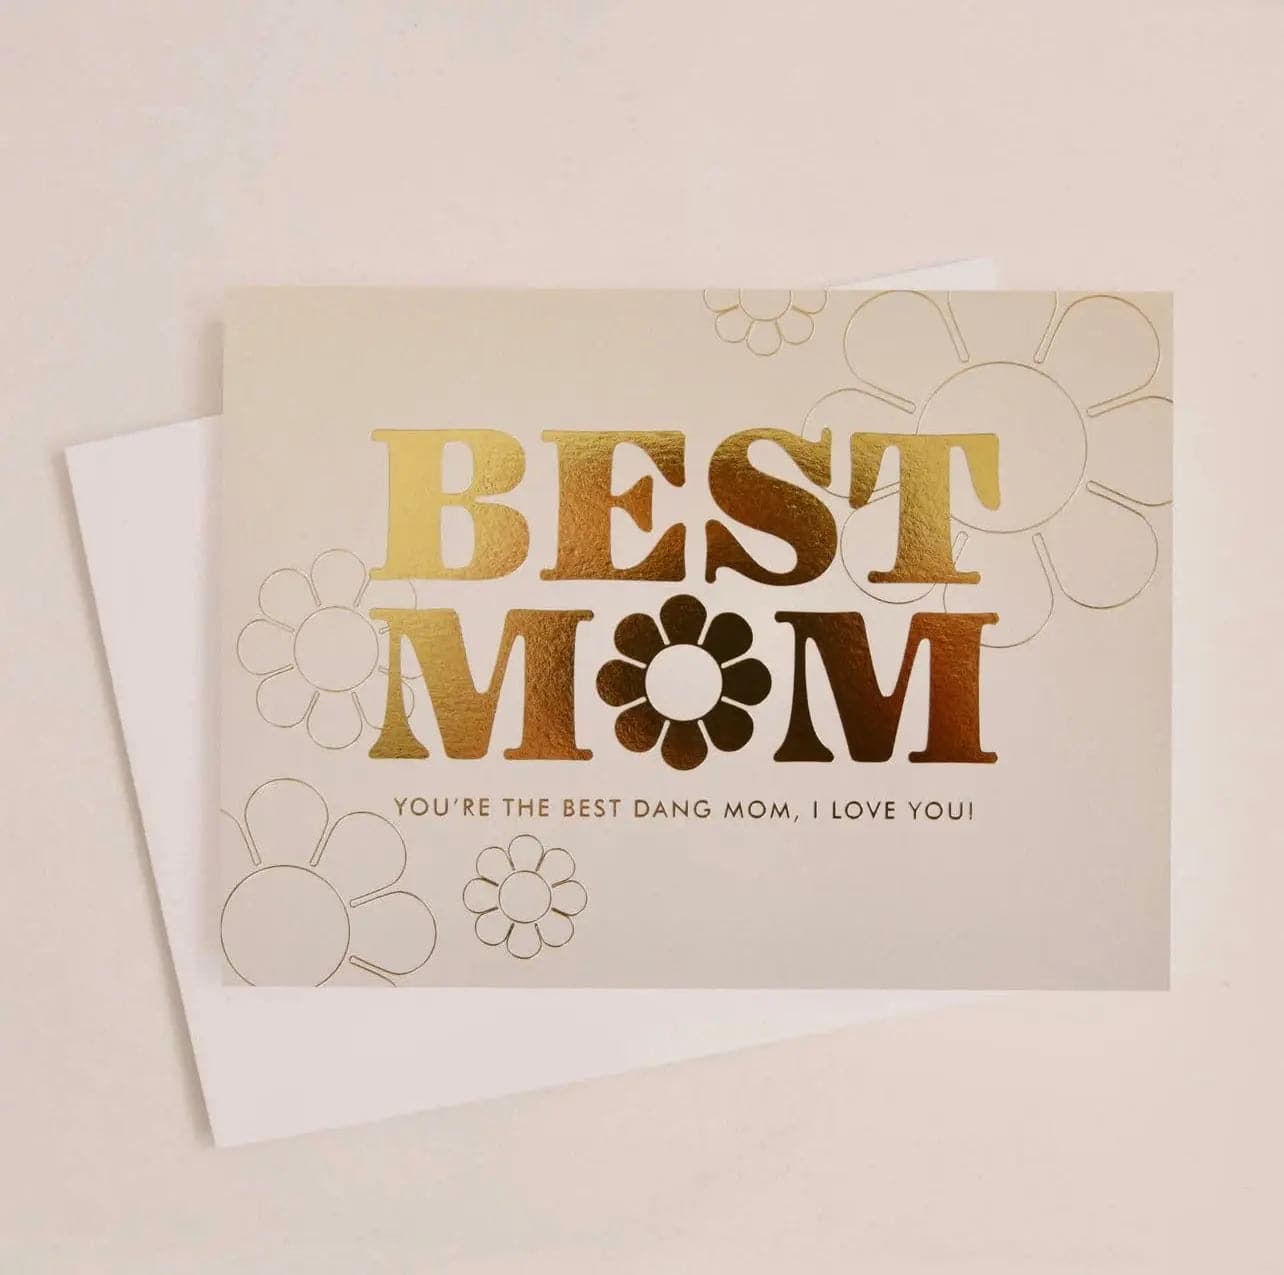 Best Dang mom card Made for you flower shop